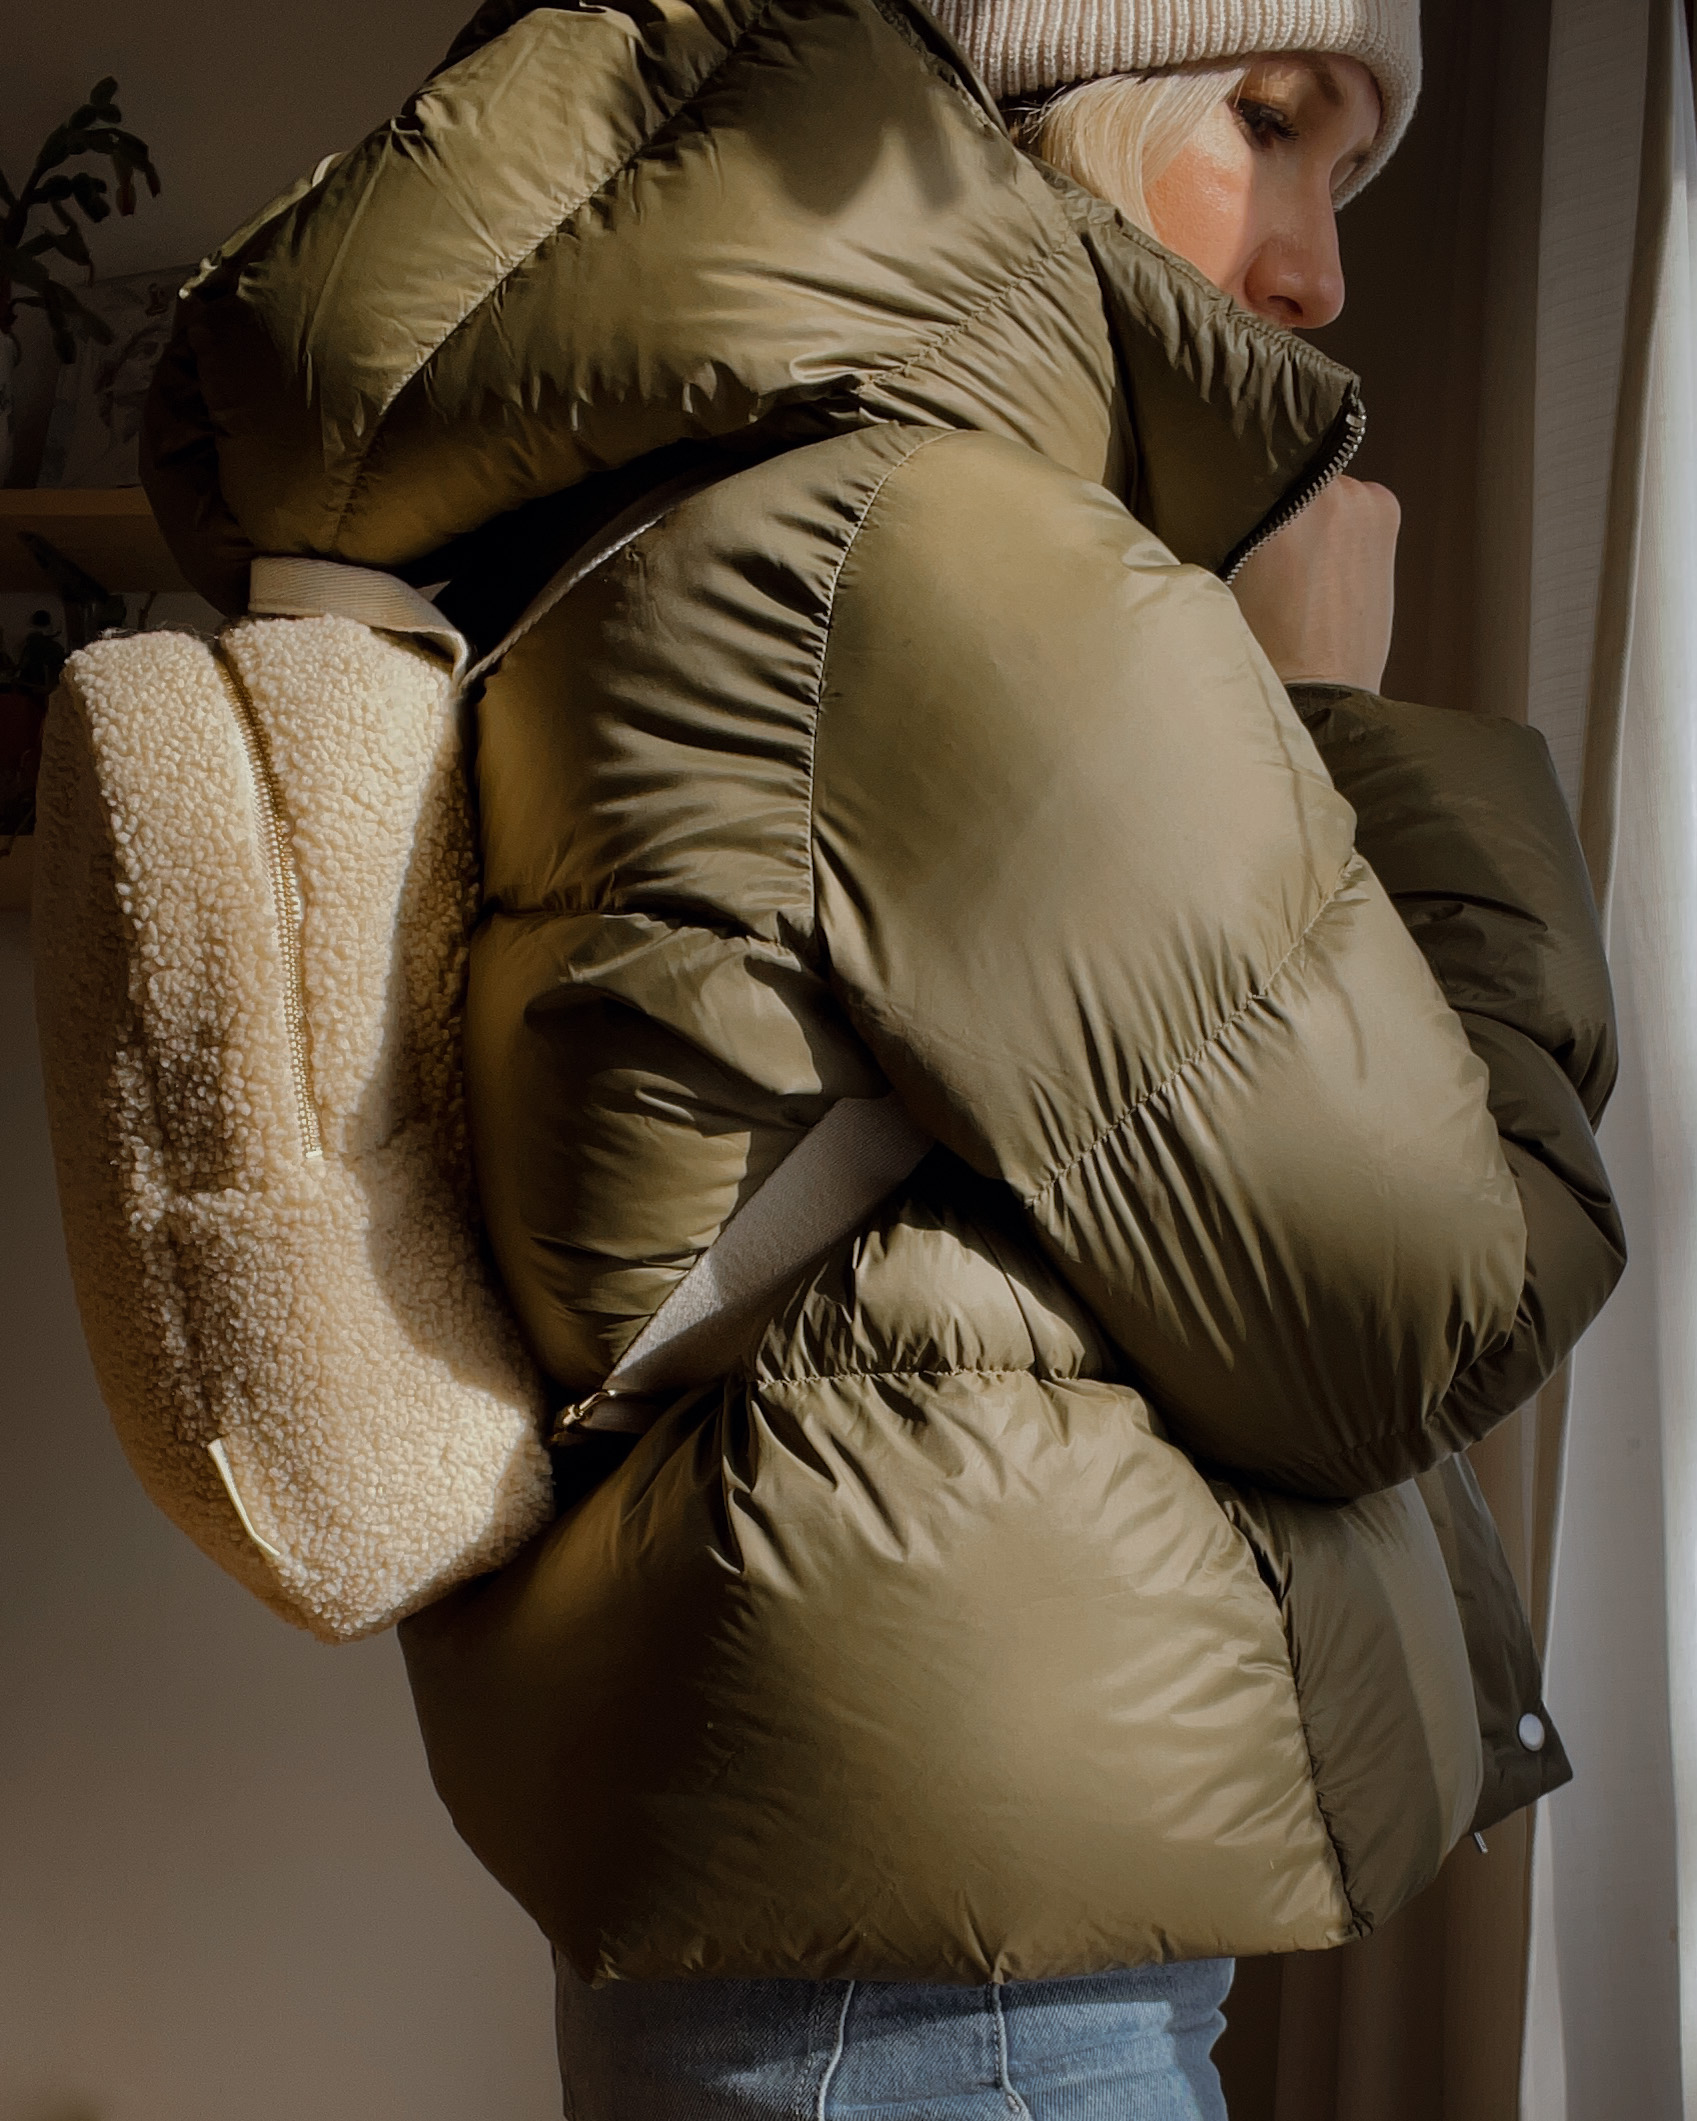 Karin Emily wears a cropped army green puffer coat, cream turtleneck sweater and sherpa backpack